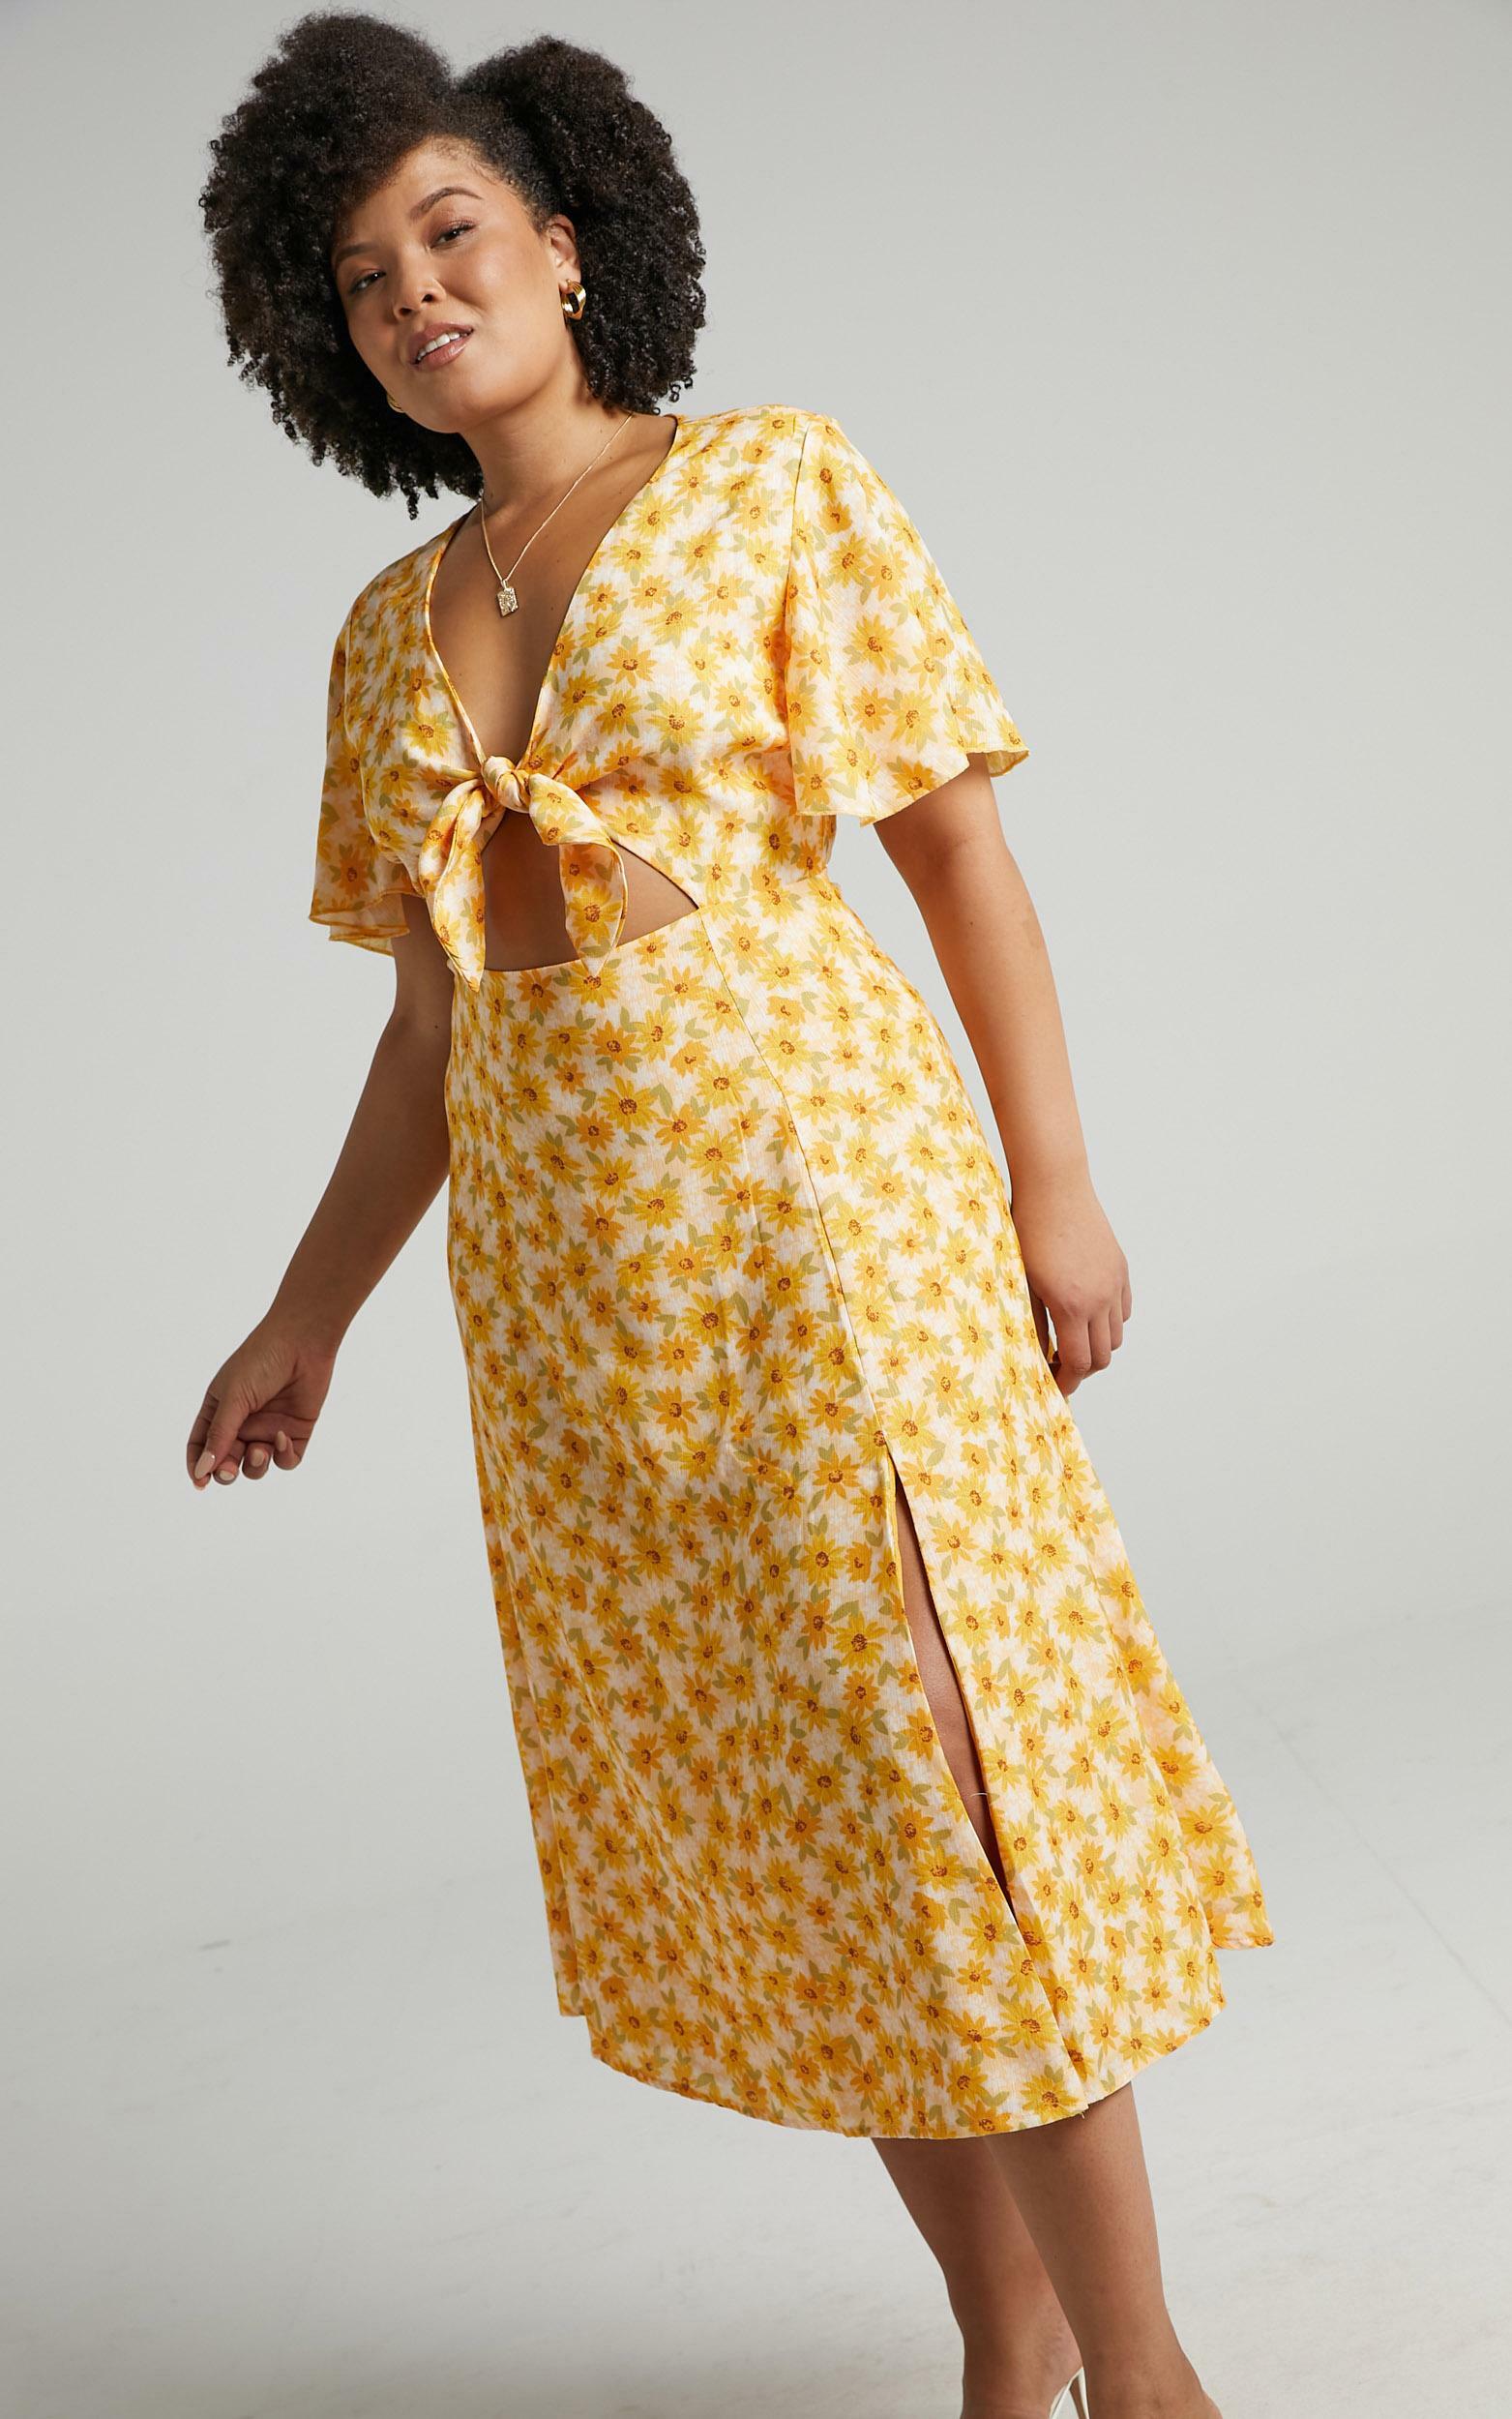 Wild And Free Mind Midi Dress in Sunflower Print - 20, YEL1, hi-res image number null